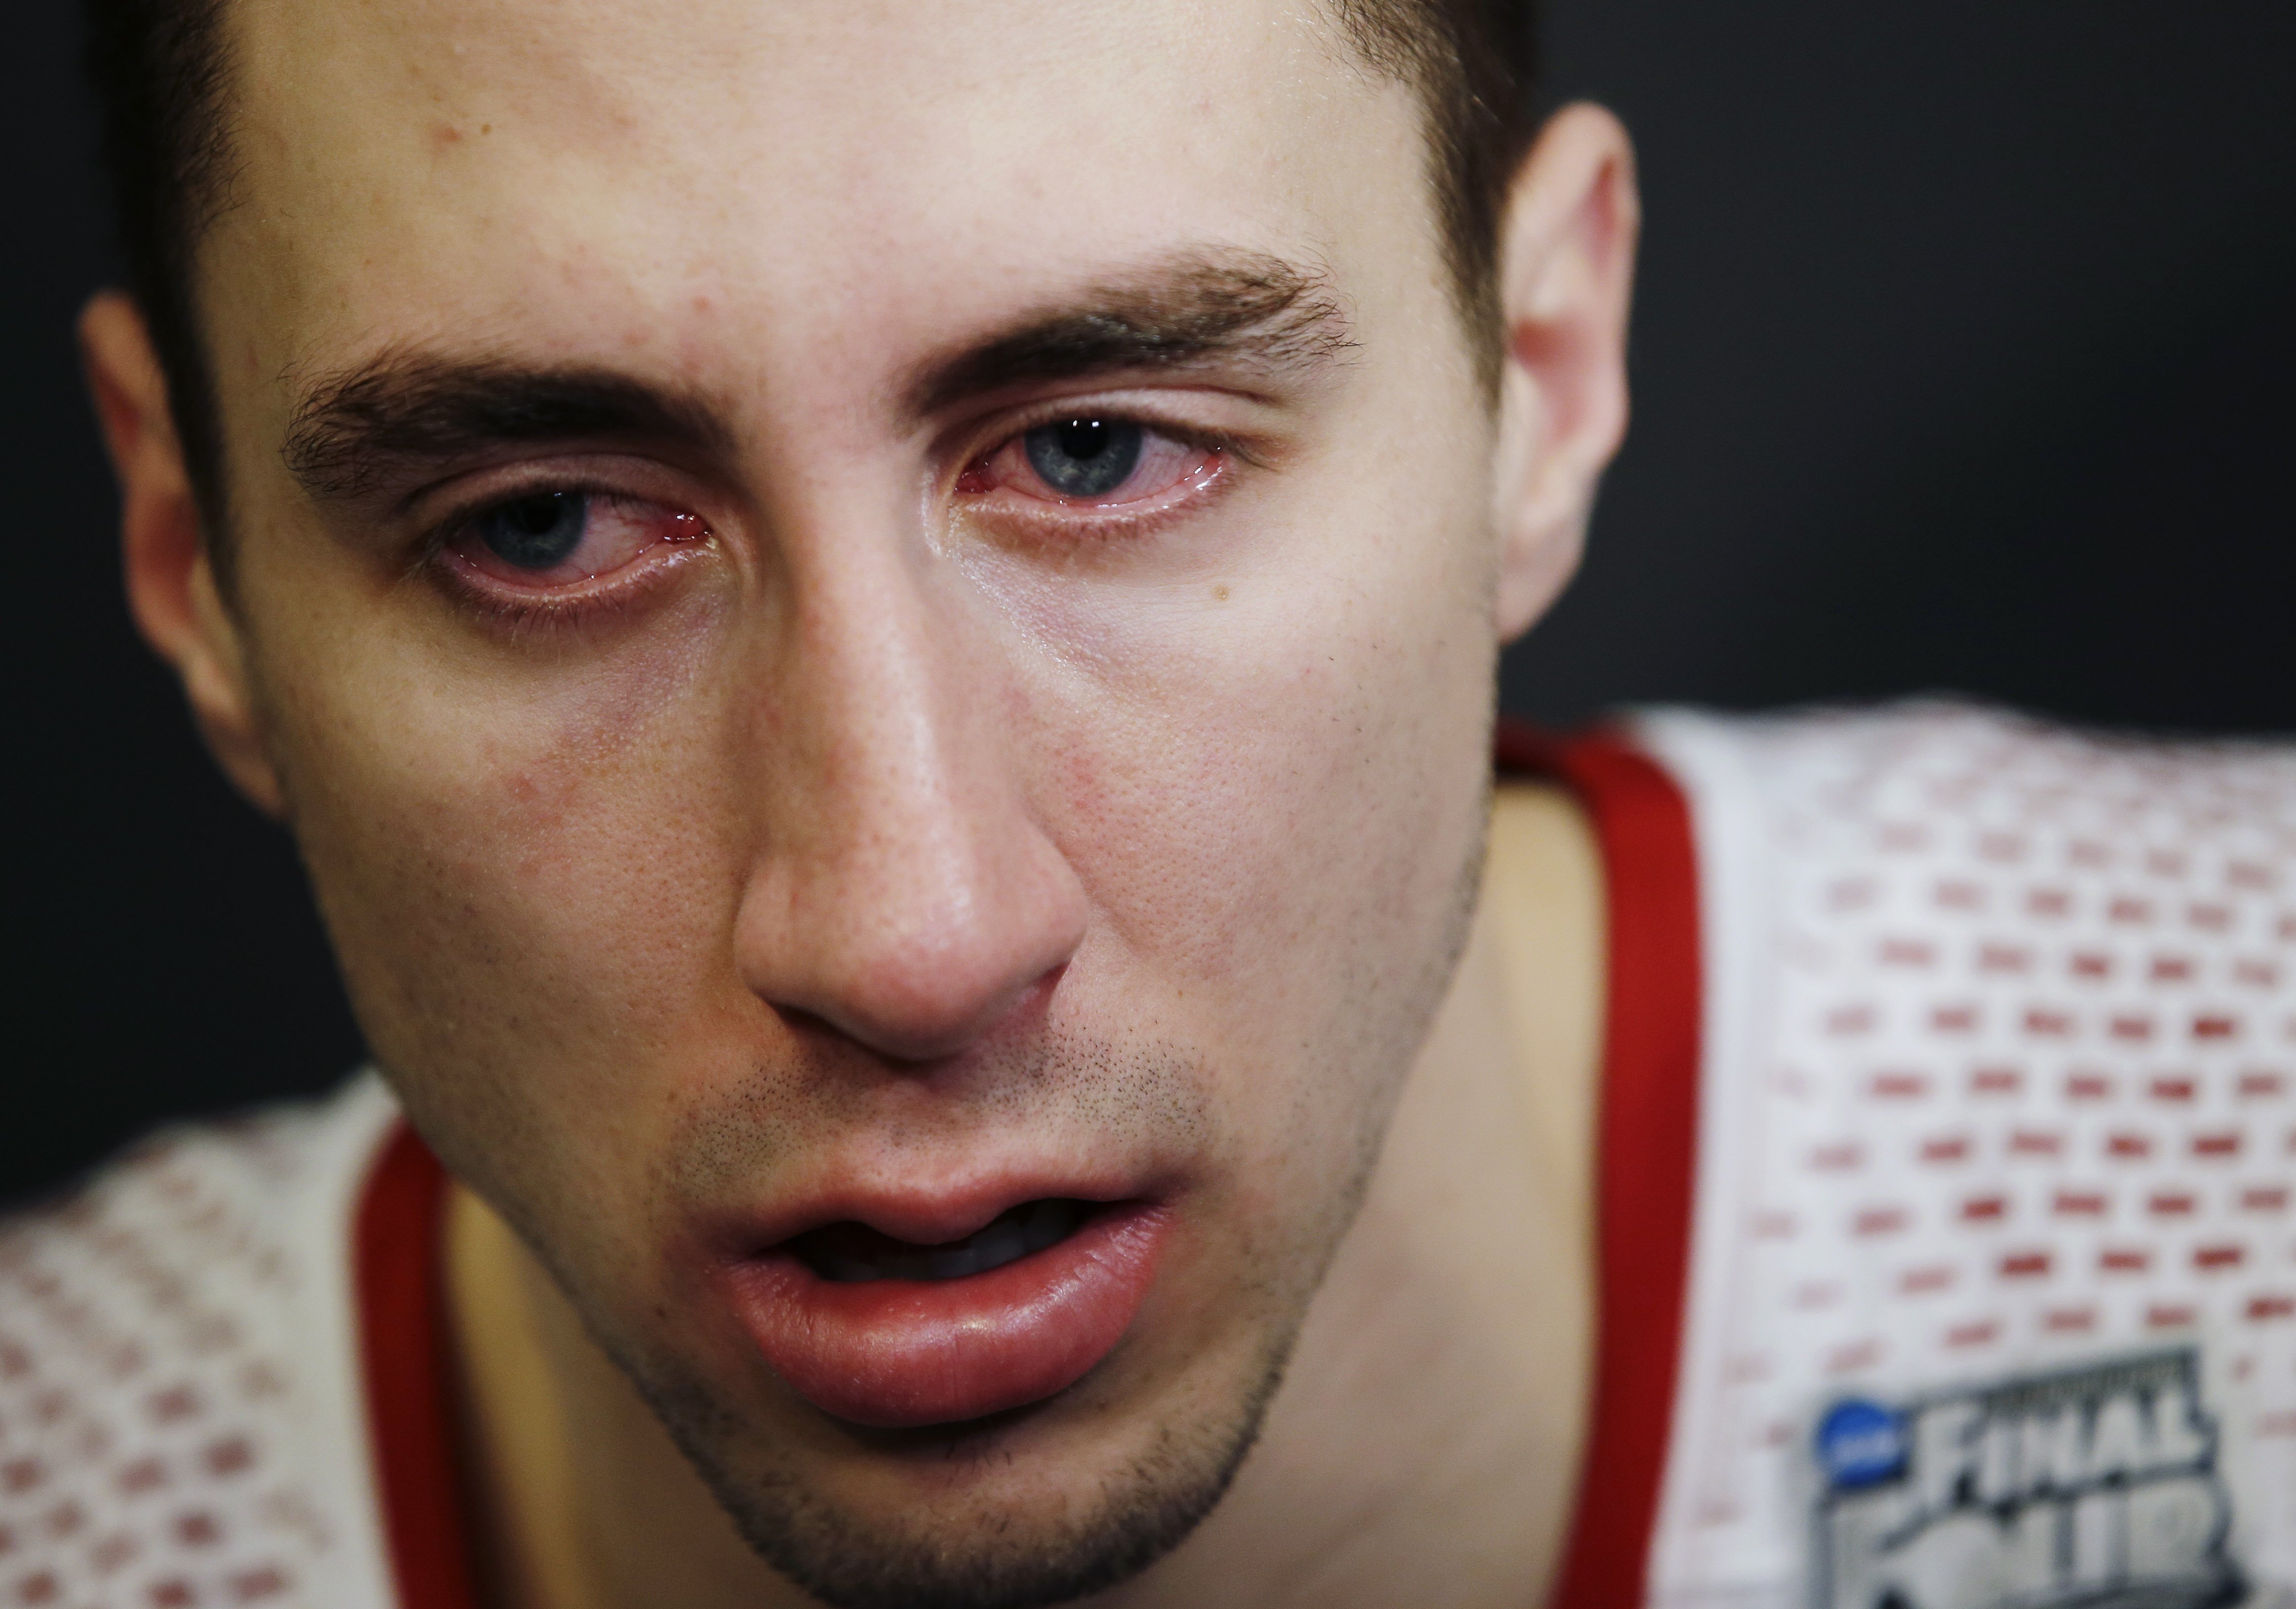 Wisconsin guard Josh Gasser sits dejected in the locker room after losing to Kentucky 74-73 at their NCAA Final Four tournament college basketball semifinal game Saturday, April 5, 2014, in Arlington, Texas.